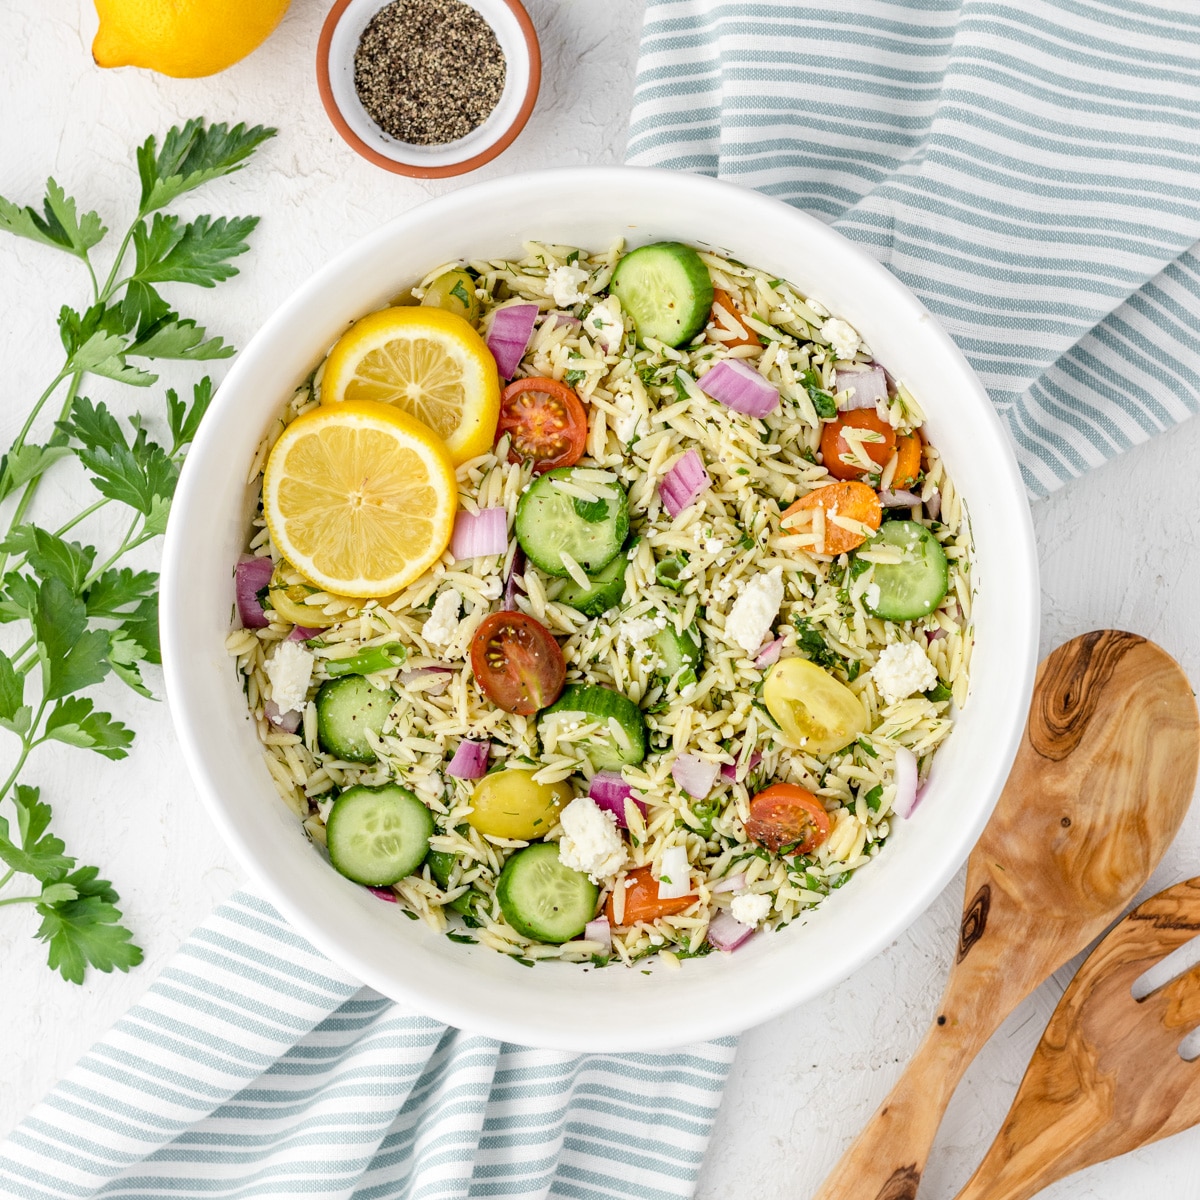 Colorful salad of small orzo pasta with lemon, chopped tomatoes, cucumber and parsley with lemon slices garnishing the side.